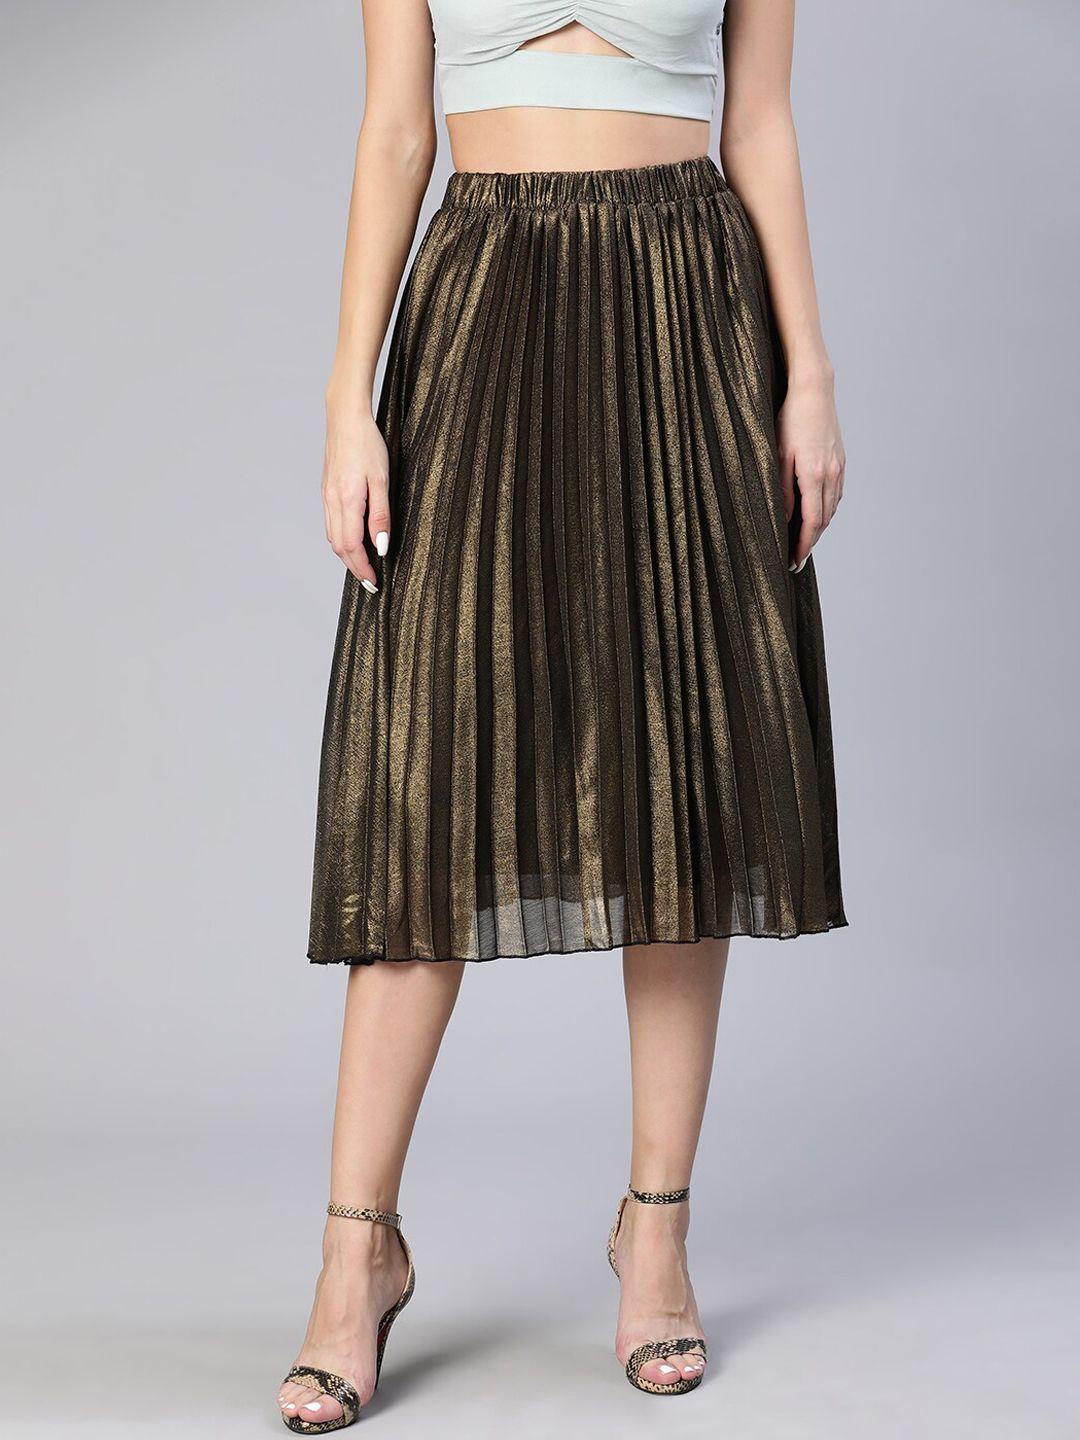 Oxolloxo Accordion Pleated A-Line Skirt